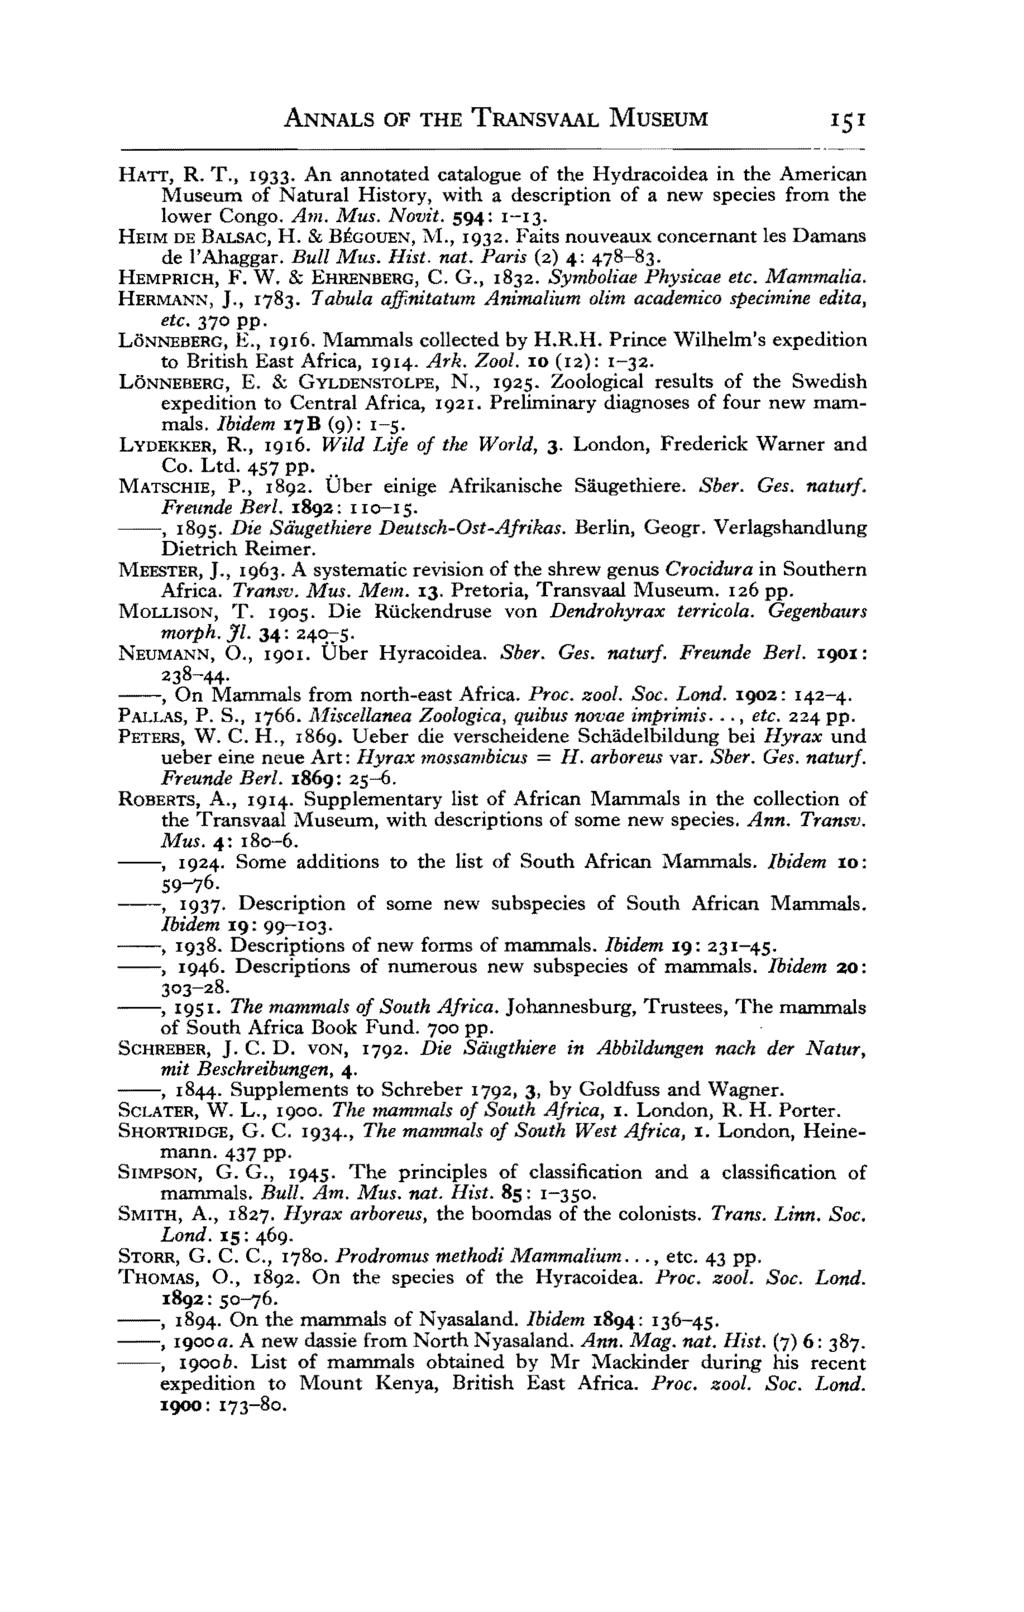 ANNALS OF THE TRANSVAAL MUSEUM HATT, R. T., 1933. An annotated catalogue of the Hydracoidea in the American Museum of Natural History, with a description of a new species from the lower Congo. Am. Mus. Novit.